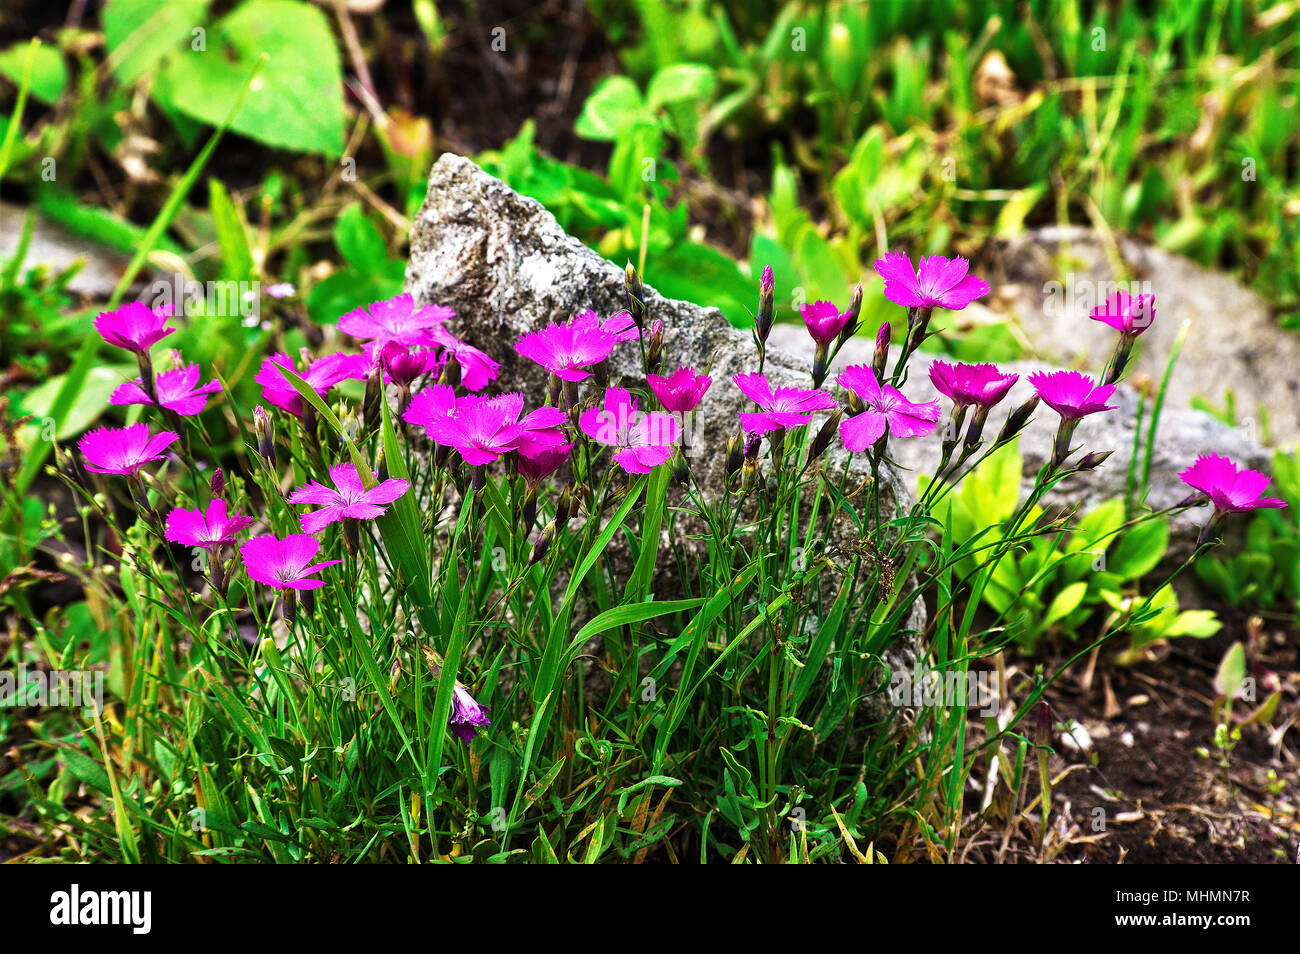 A nice group of Dianthus Carthusianorum (wild carnation, carthusian carnation, carthusian pink, clusterhead) in the wild. Stock Photo